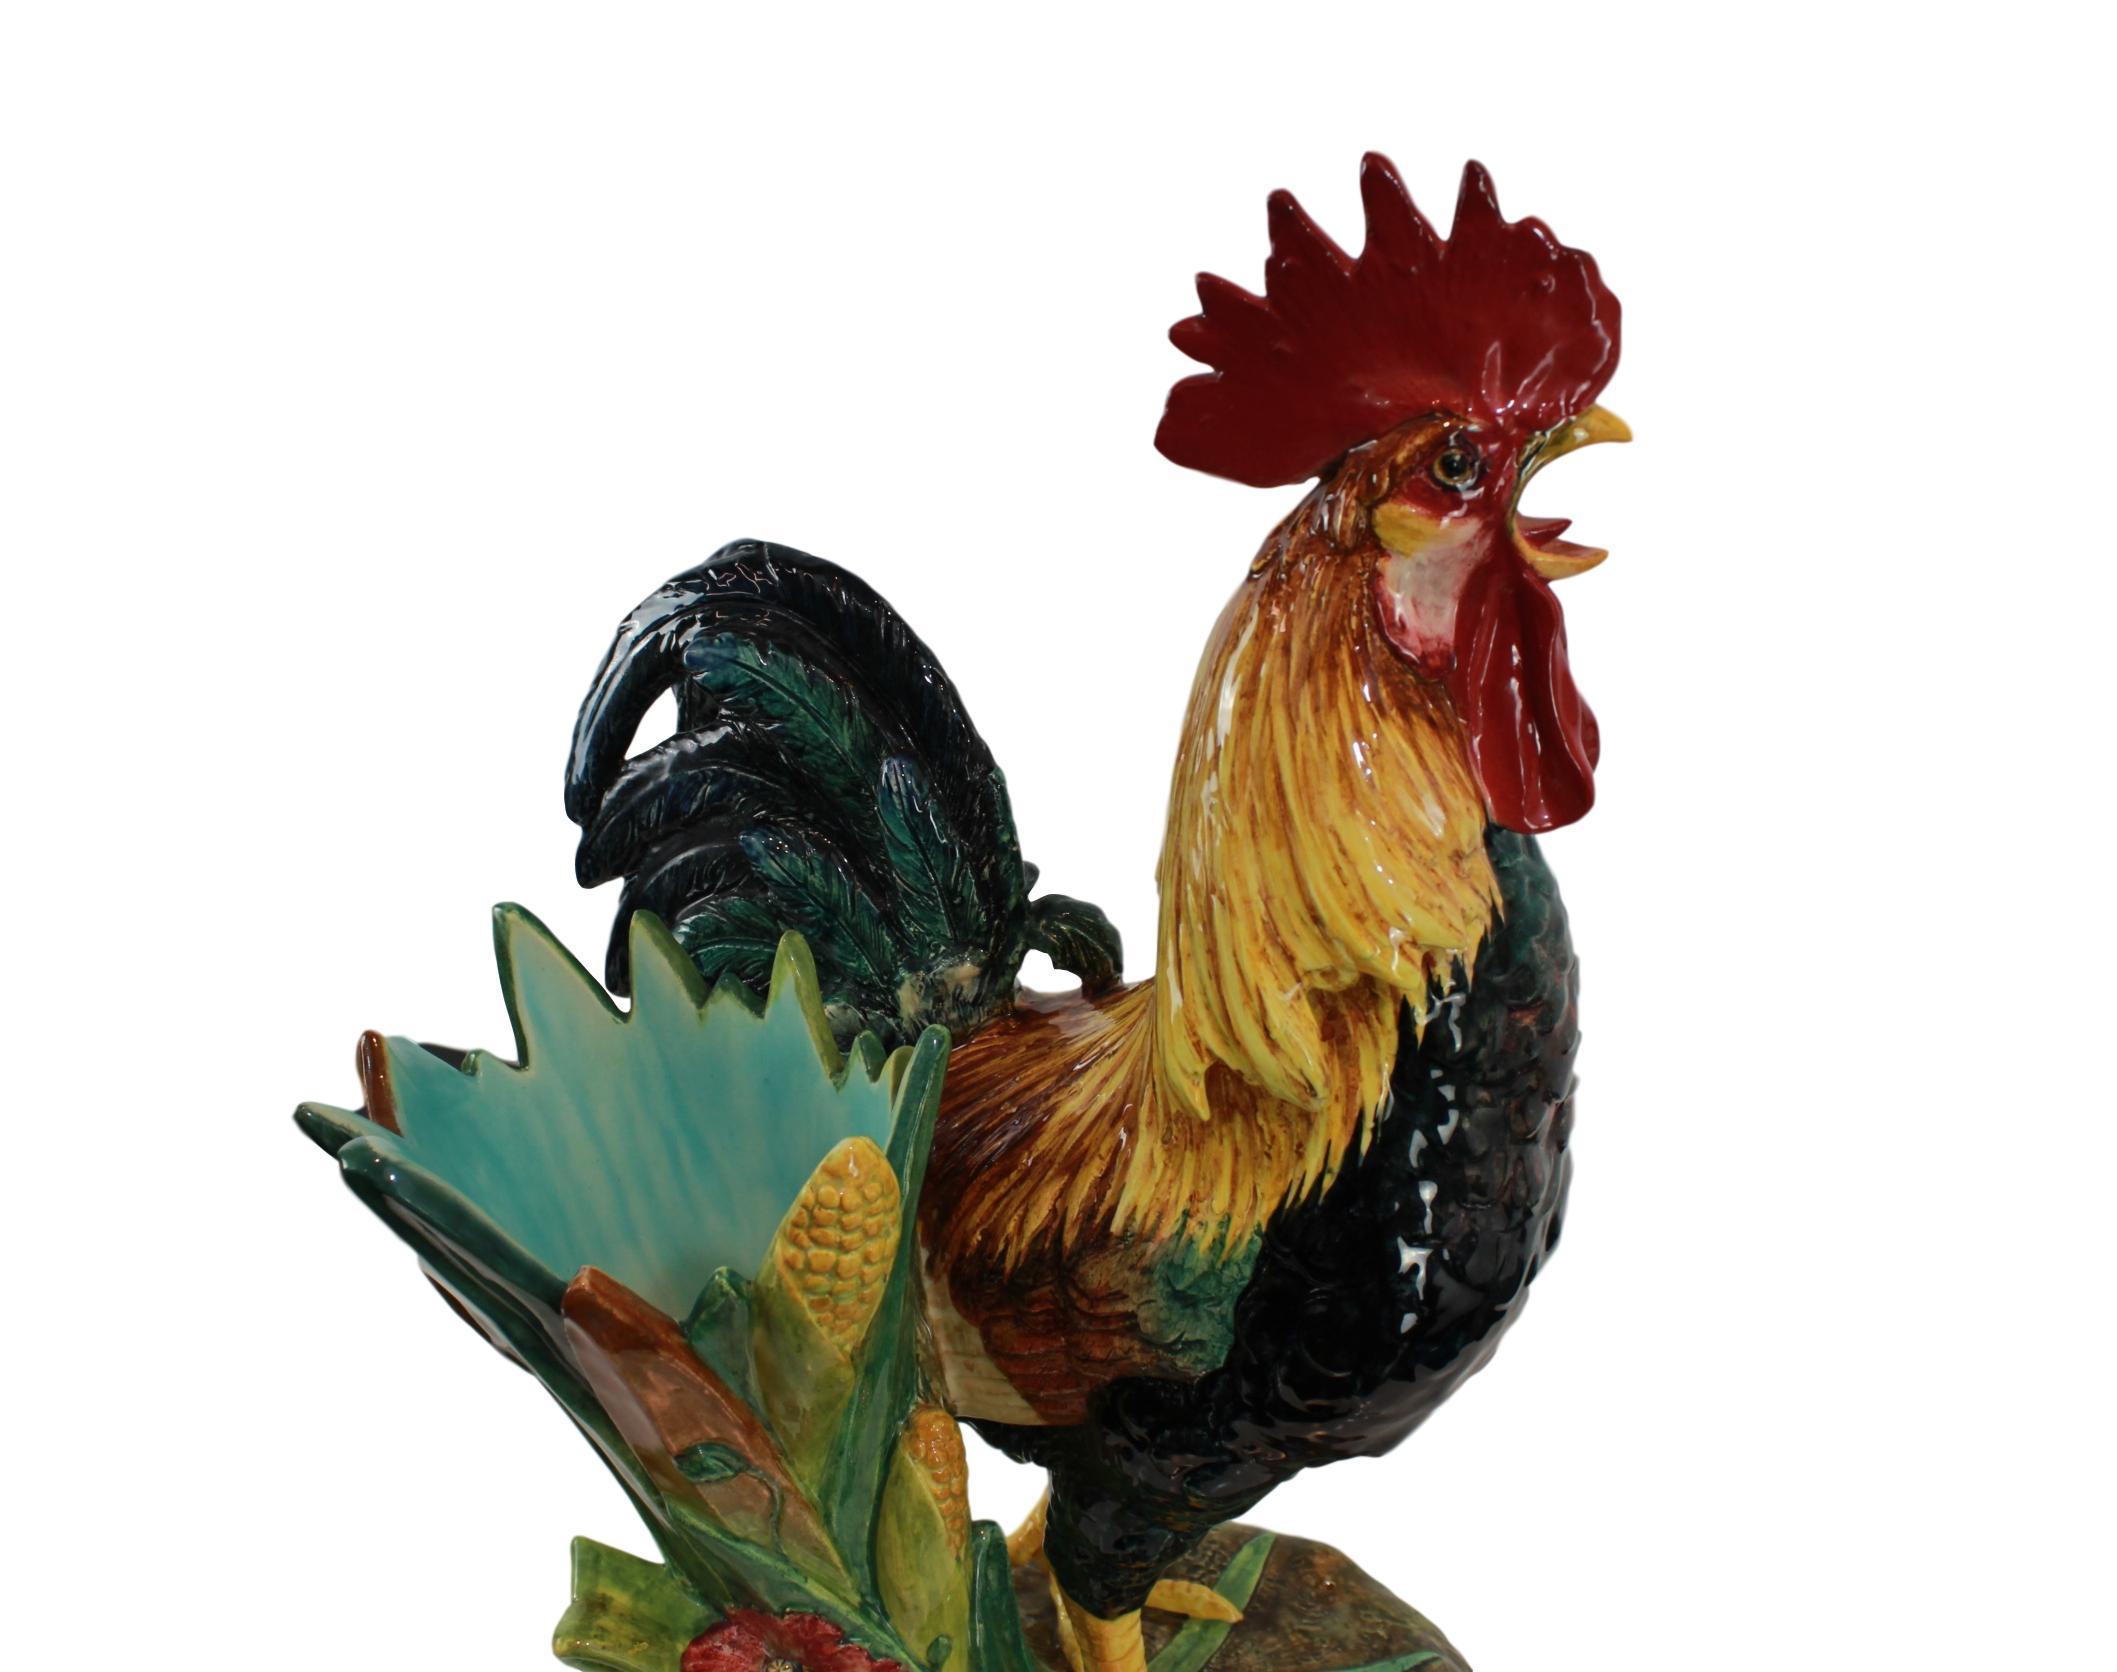 19th Century Very Large Majolica Rooster Vase by Delphin Massier, French, circa 1880